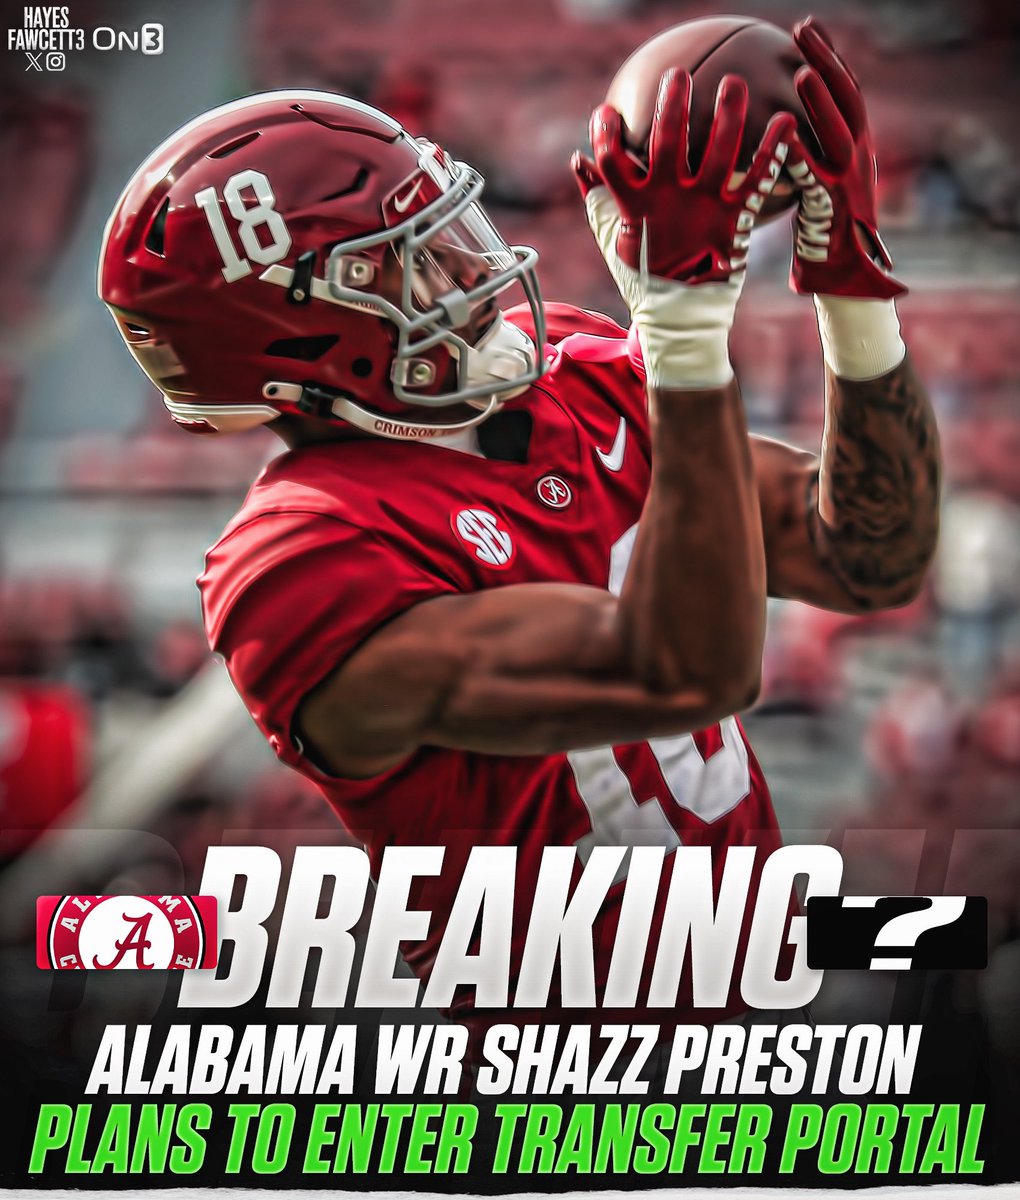 BREAKING: Alabama WR Shazz Preston plans to enter the Transfer Portal, he tells @On3sports The 6’1 200 WR was ranked as a Top 50 Recruit in the ‘22 Class (No. 6 WR) Will have 3 years of eligibility remaining on3.com/news/alabama-w…